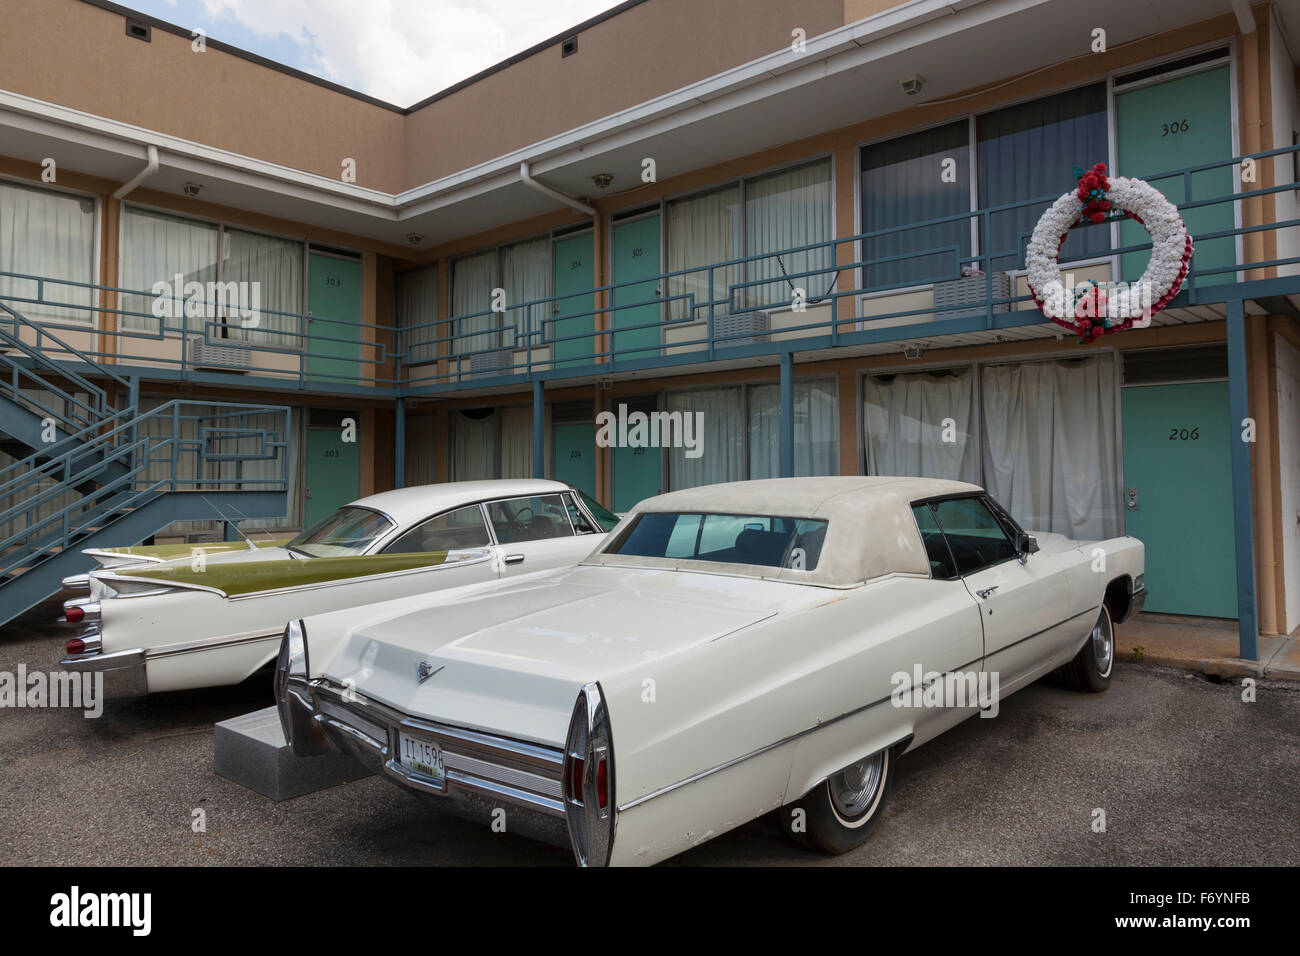 Das National Civil Rights Museum im Lorraine Motel in Memphis, Tennessee, wo Martin Luther King Jr. ermordet wurde Stockfoto